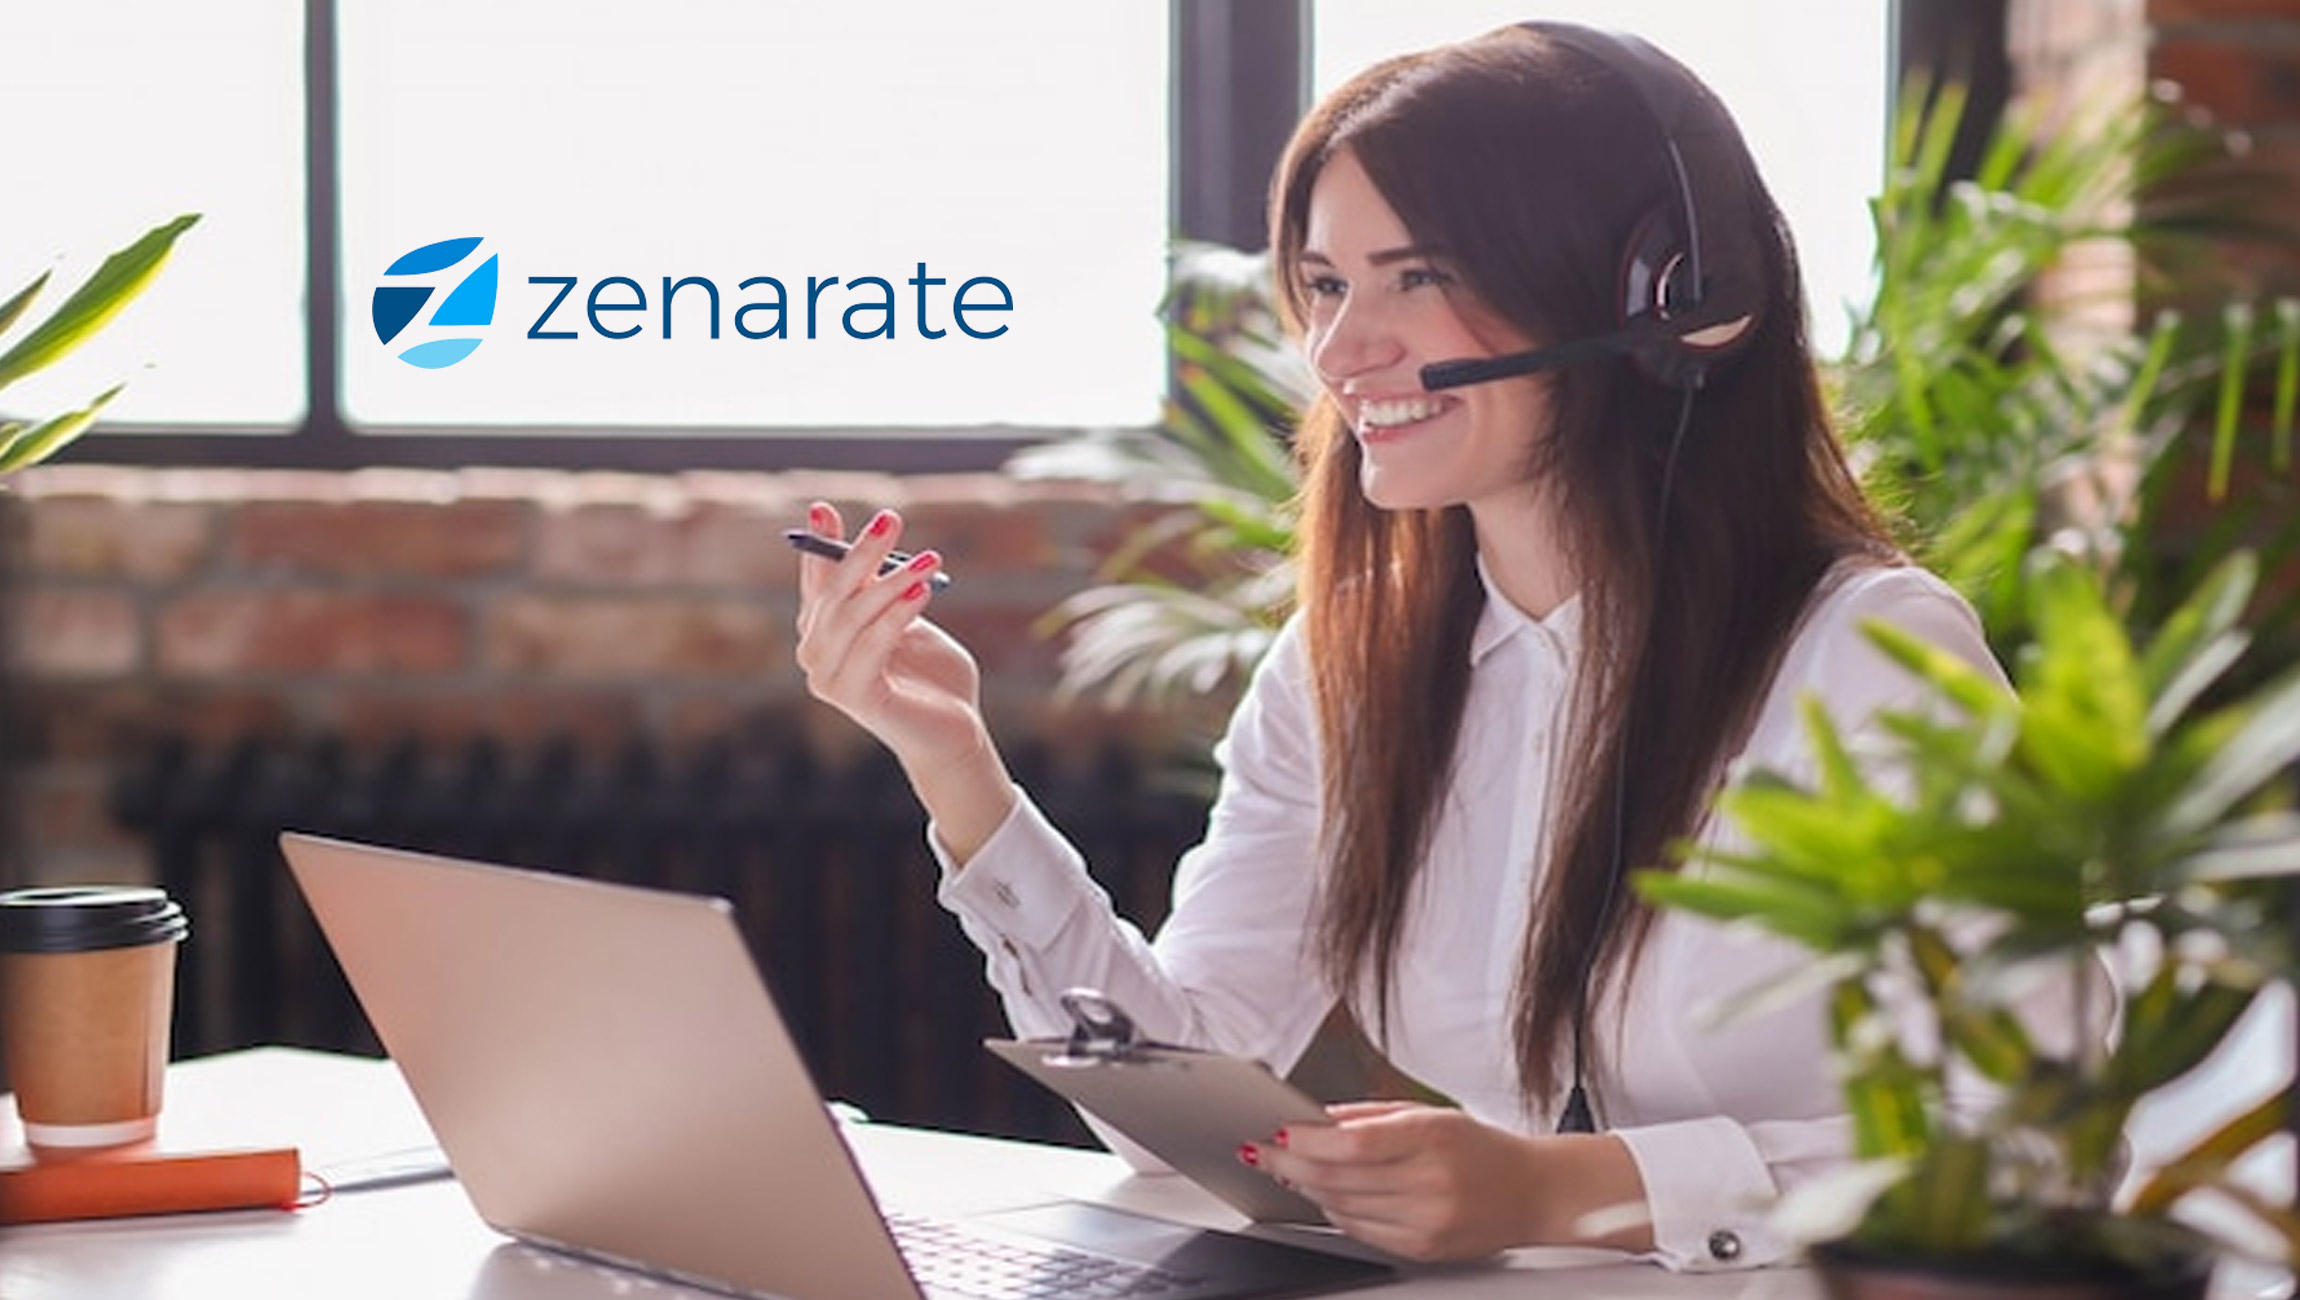 Zenarate Launches New Call Analyzer Capabilities to its AI Coach Platform to Transform Contact Center Agent Training and Performance